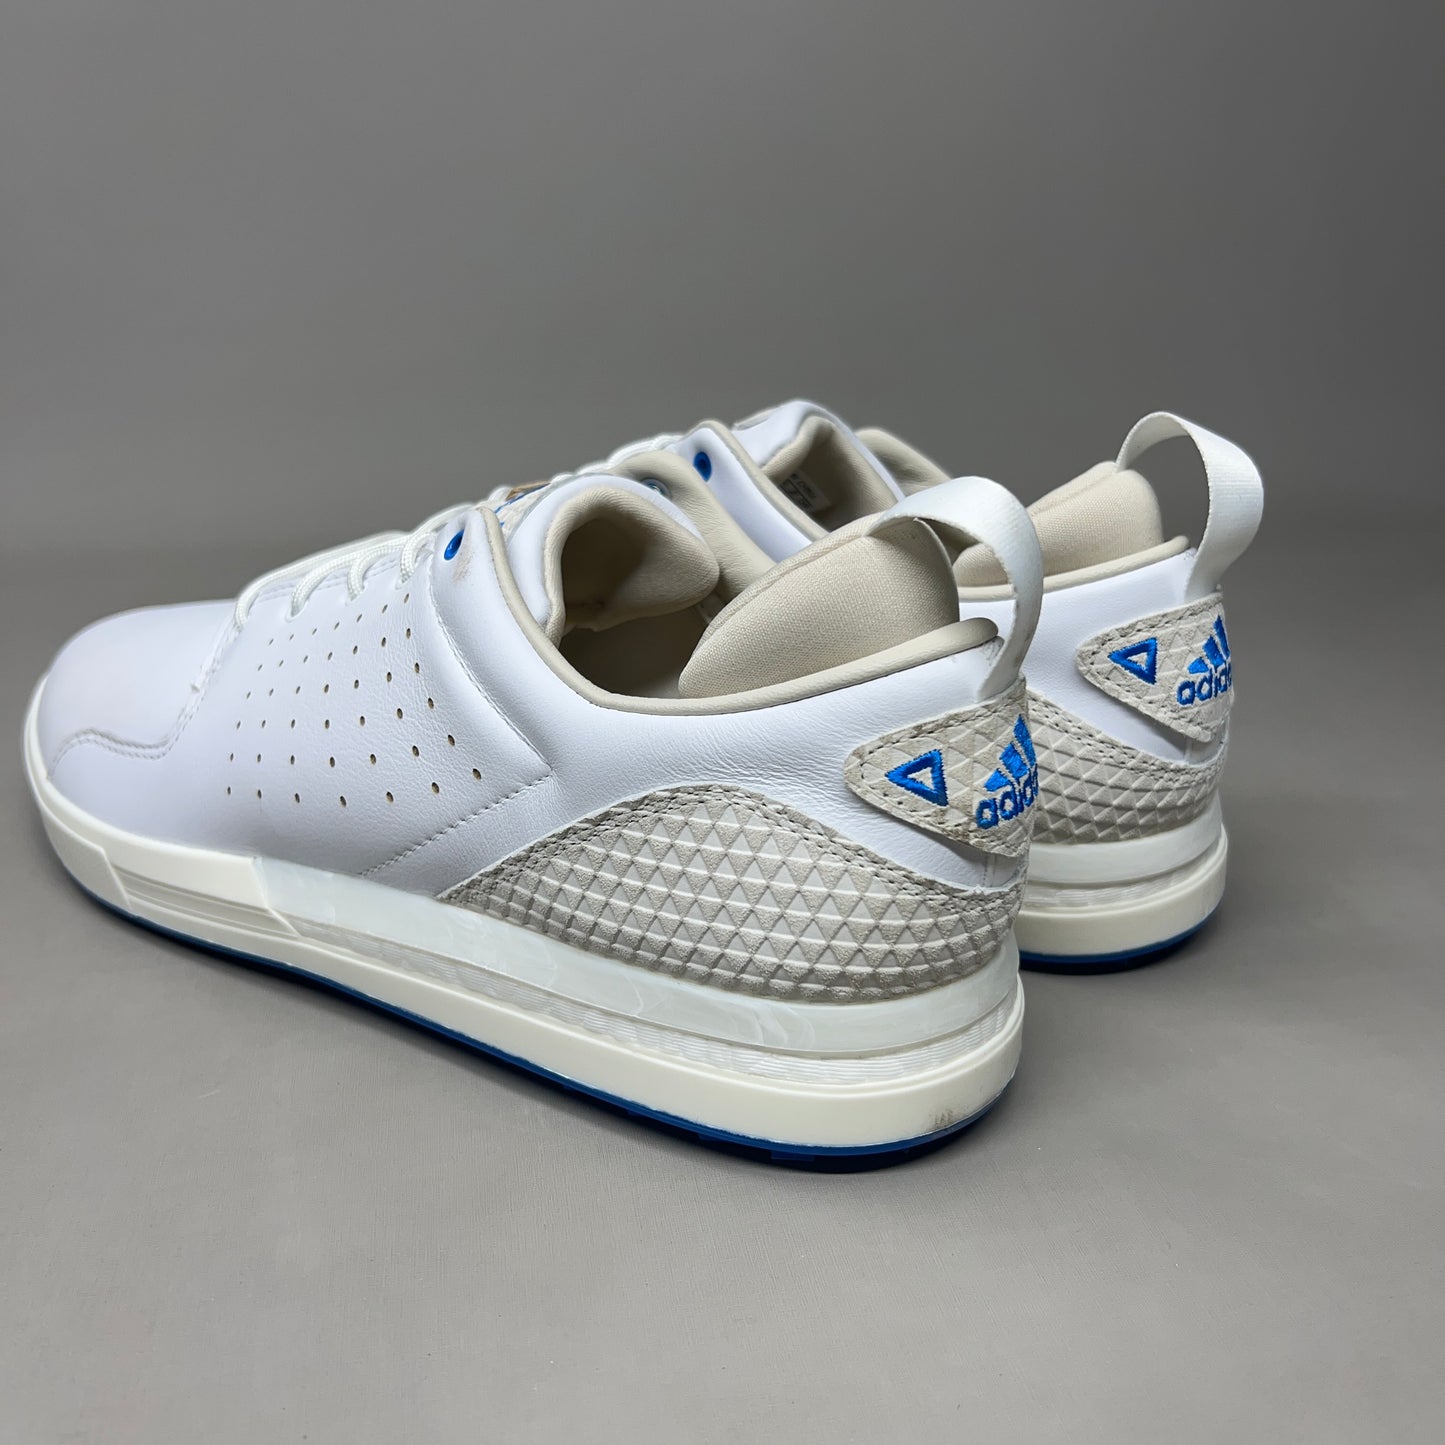 ADIDAS Flopshot Golf Shoes Waterproof Leather Men's Sz 10.5 White / Gold / Blue GV9668 (New)